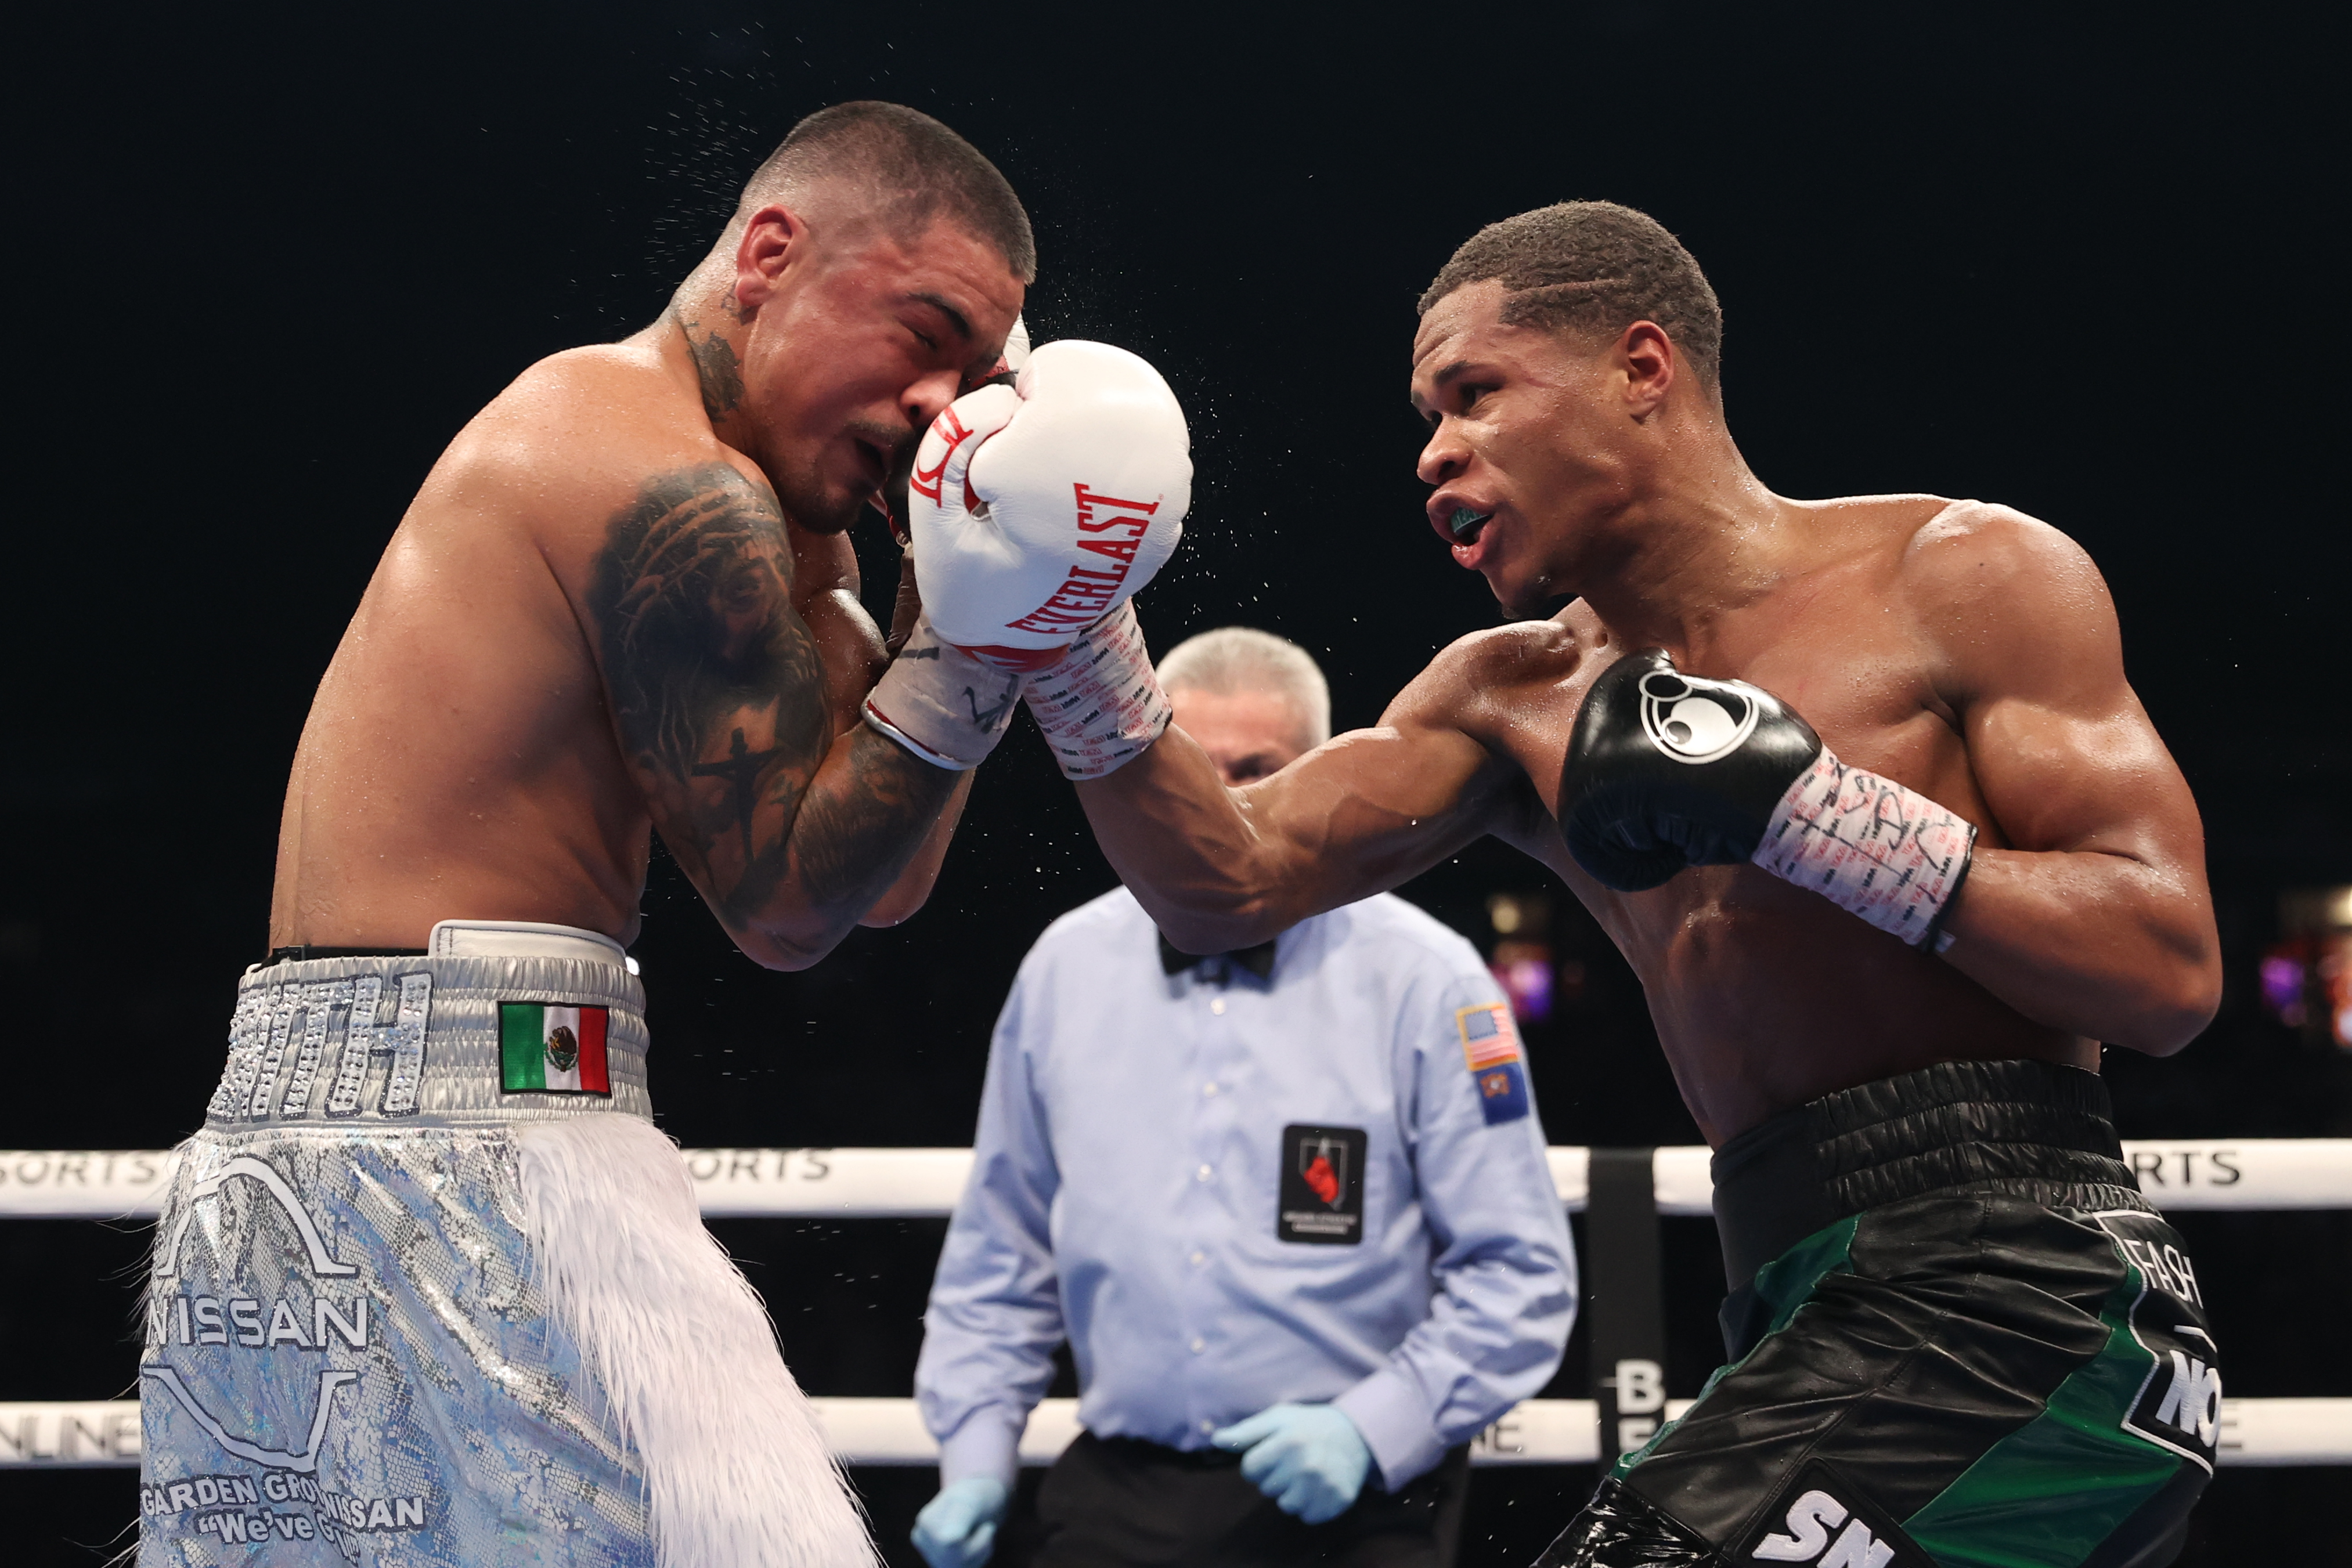 Devin Haney was just a bit too much for Joseph Diaz Jr tonight on DAZN